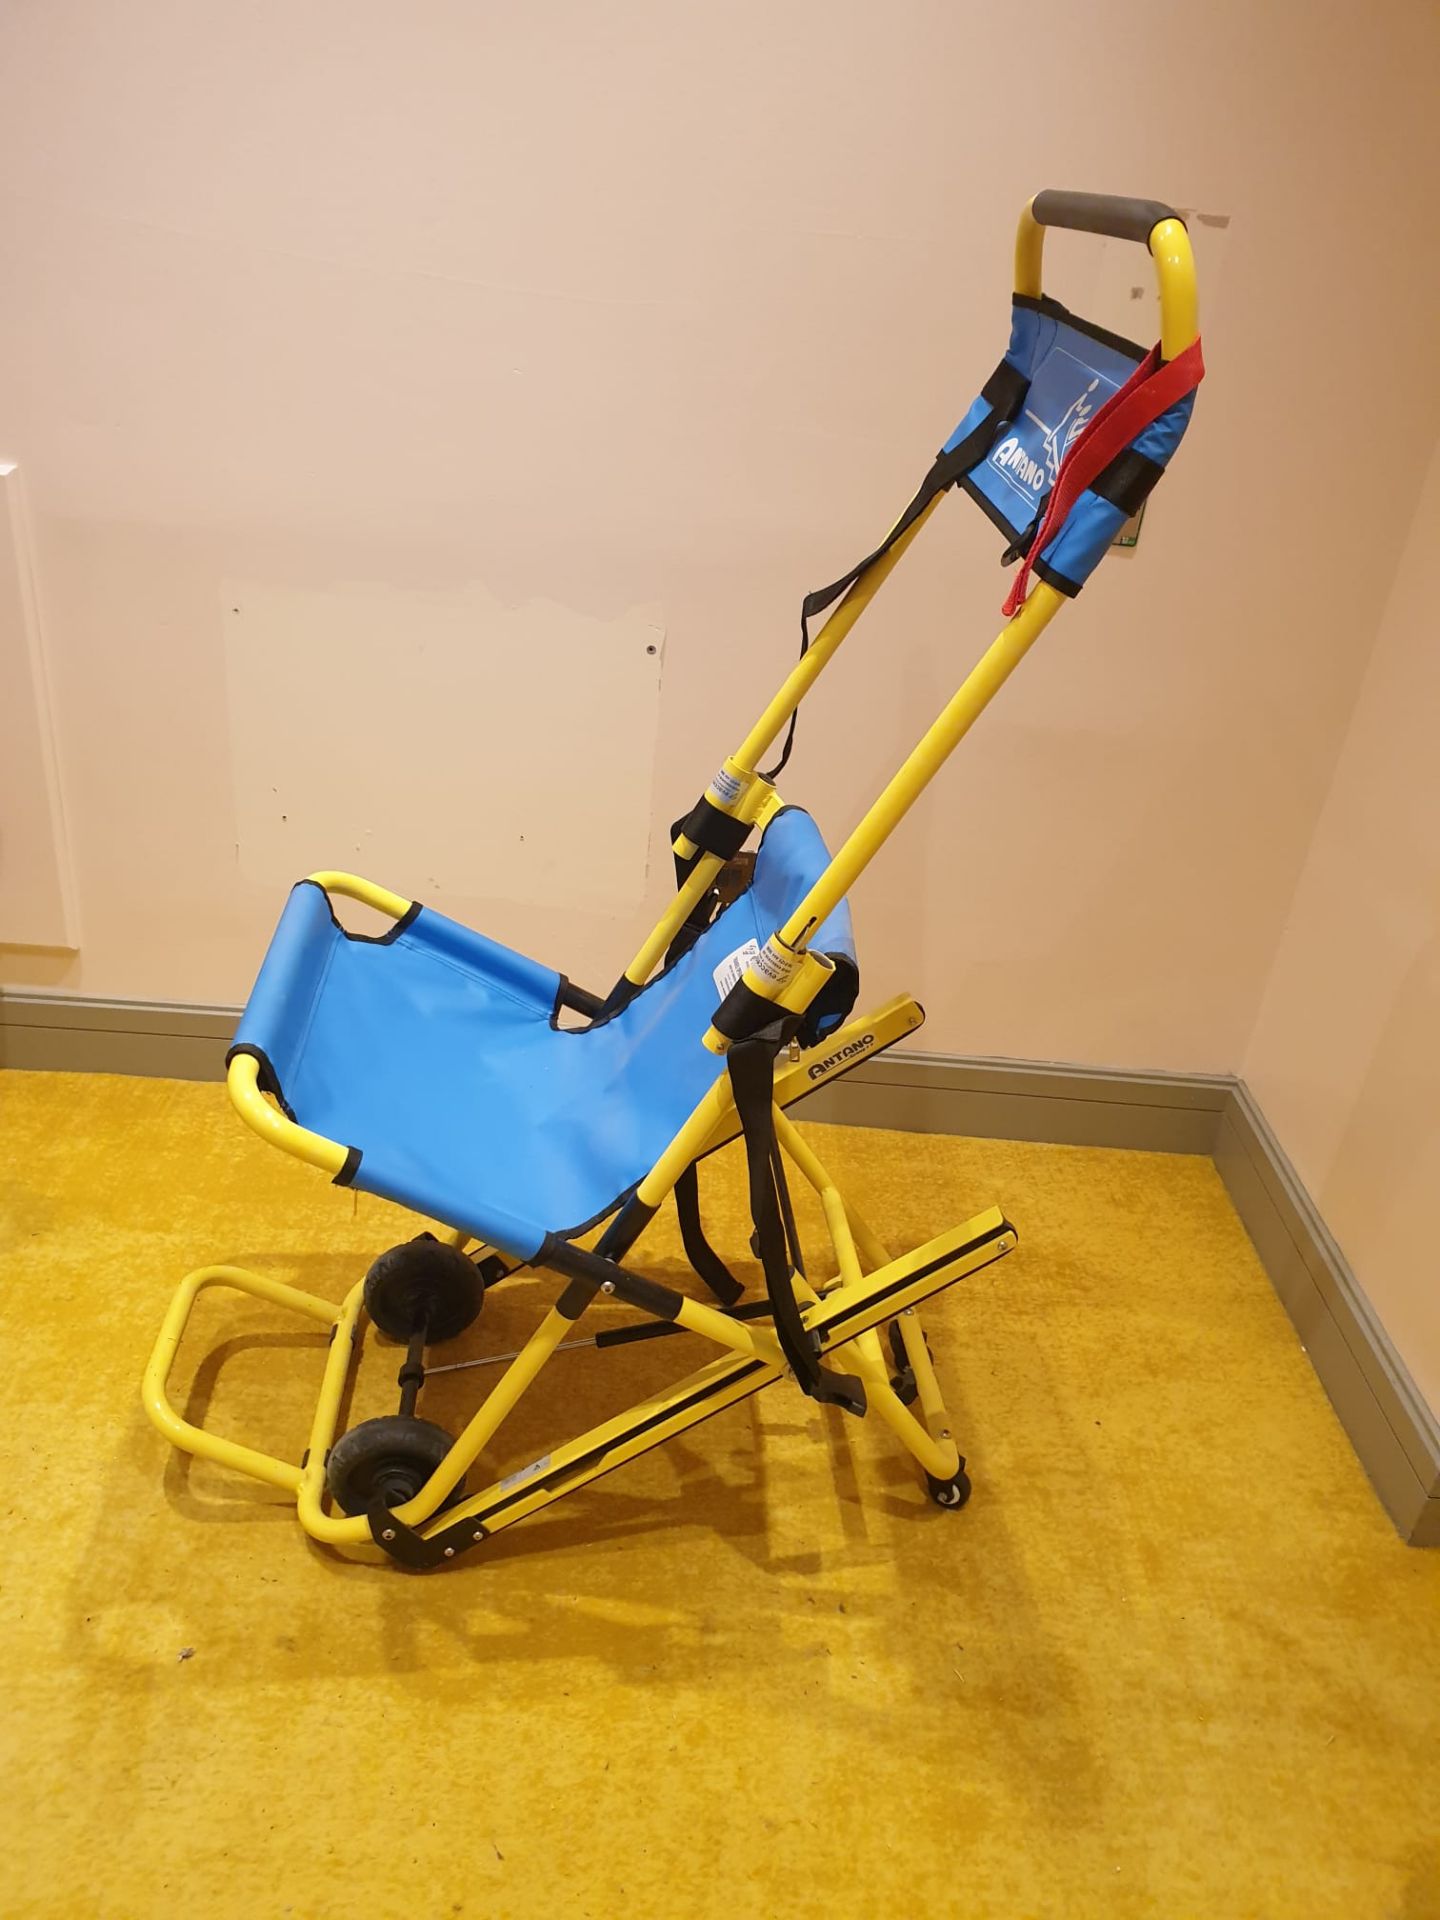 Antano LG EVACU 1 EVACUATION CHAIR A compact evac chairs are ideal for fire evacuation or to - Image 4 of 4